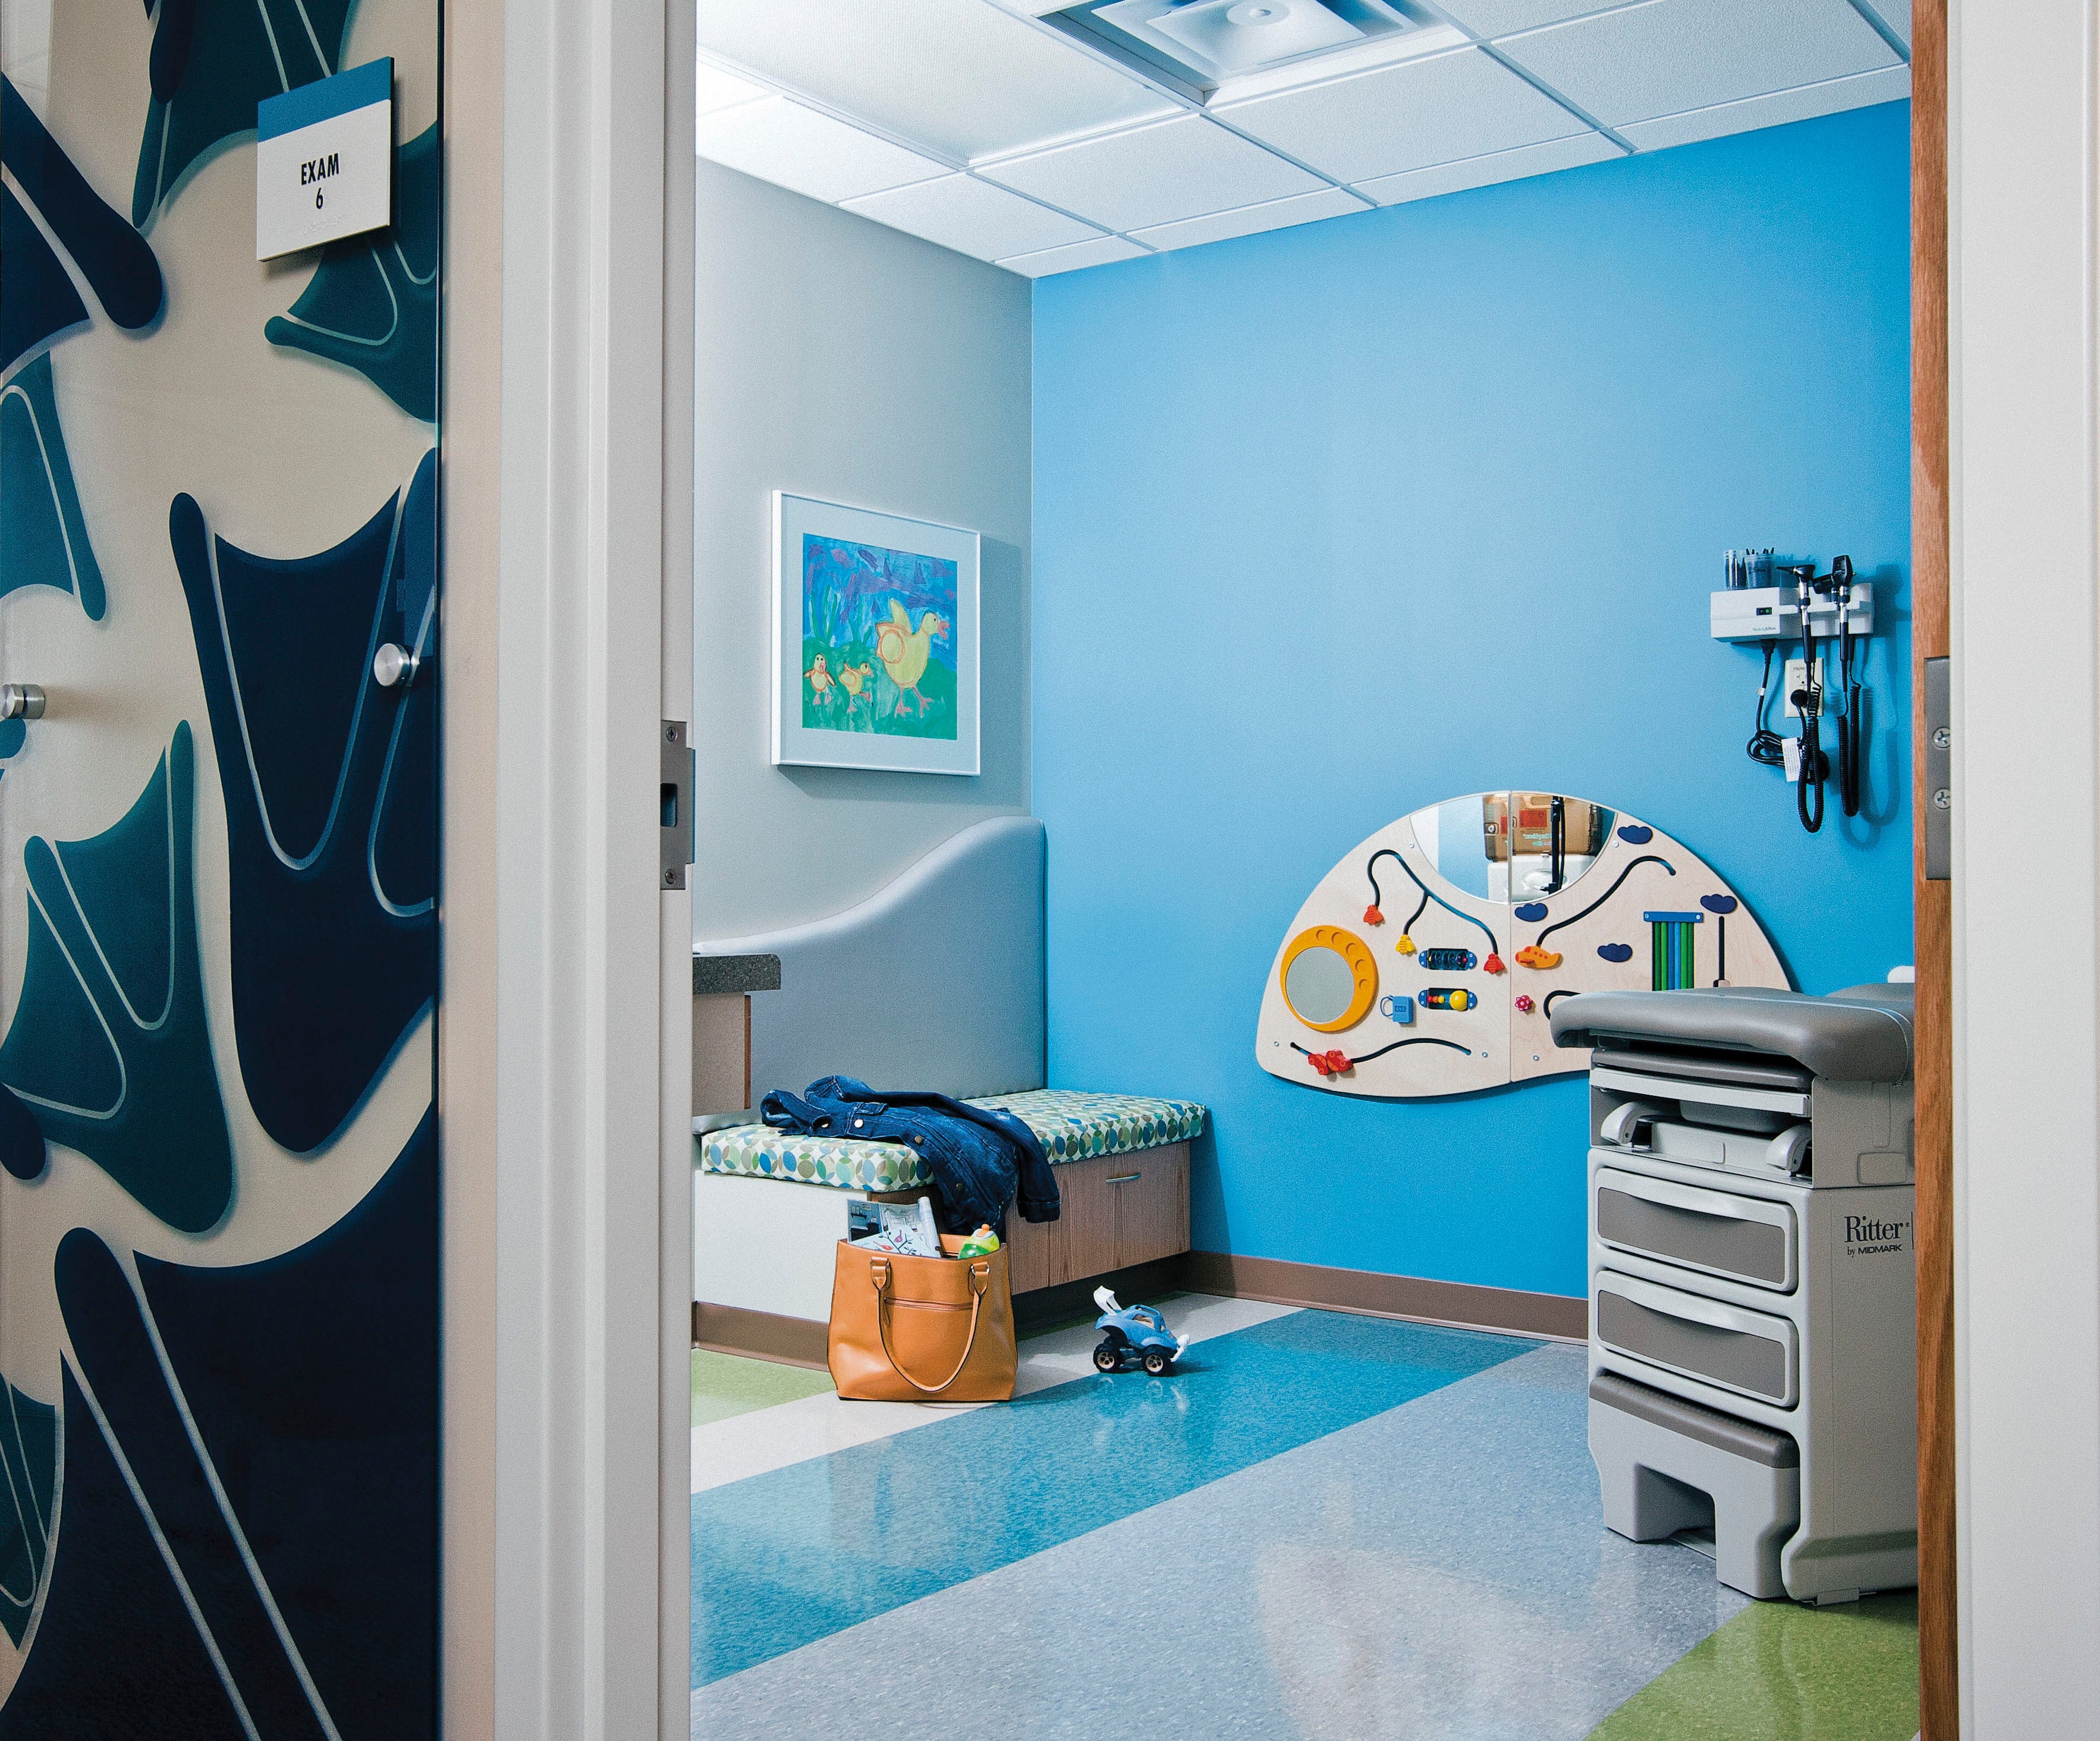 design-strategies-for-pediatric-spaces-omaha-embed